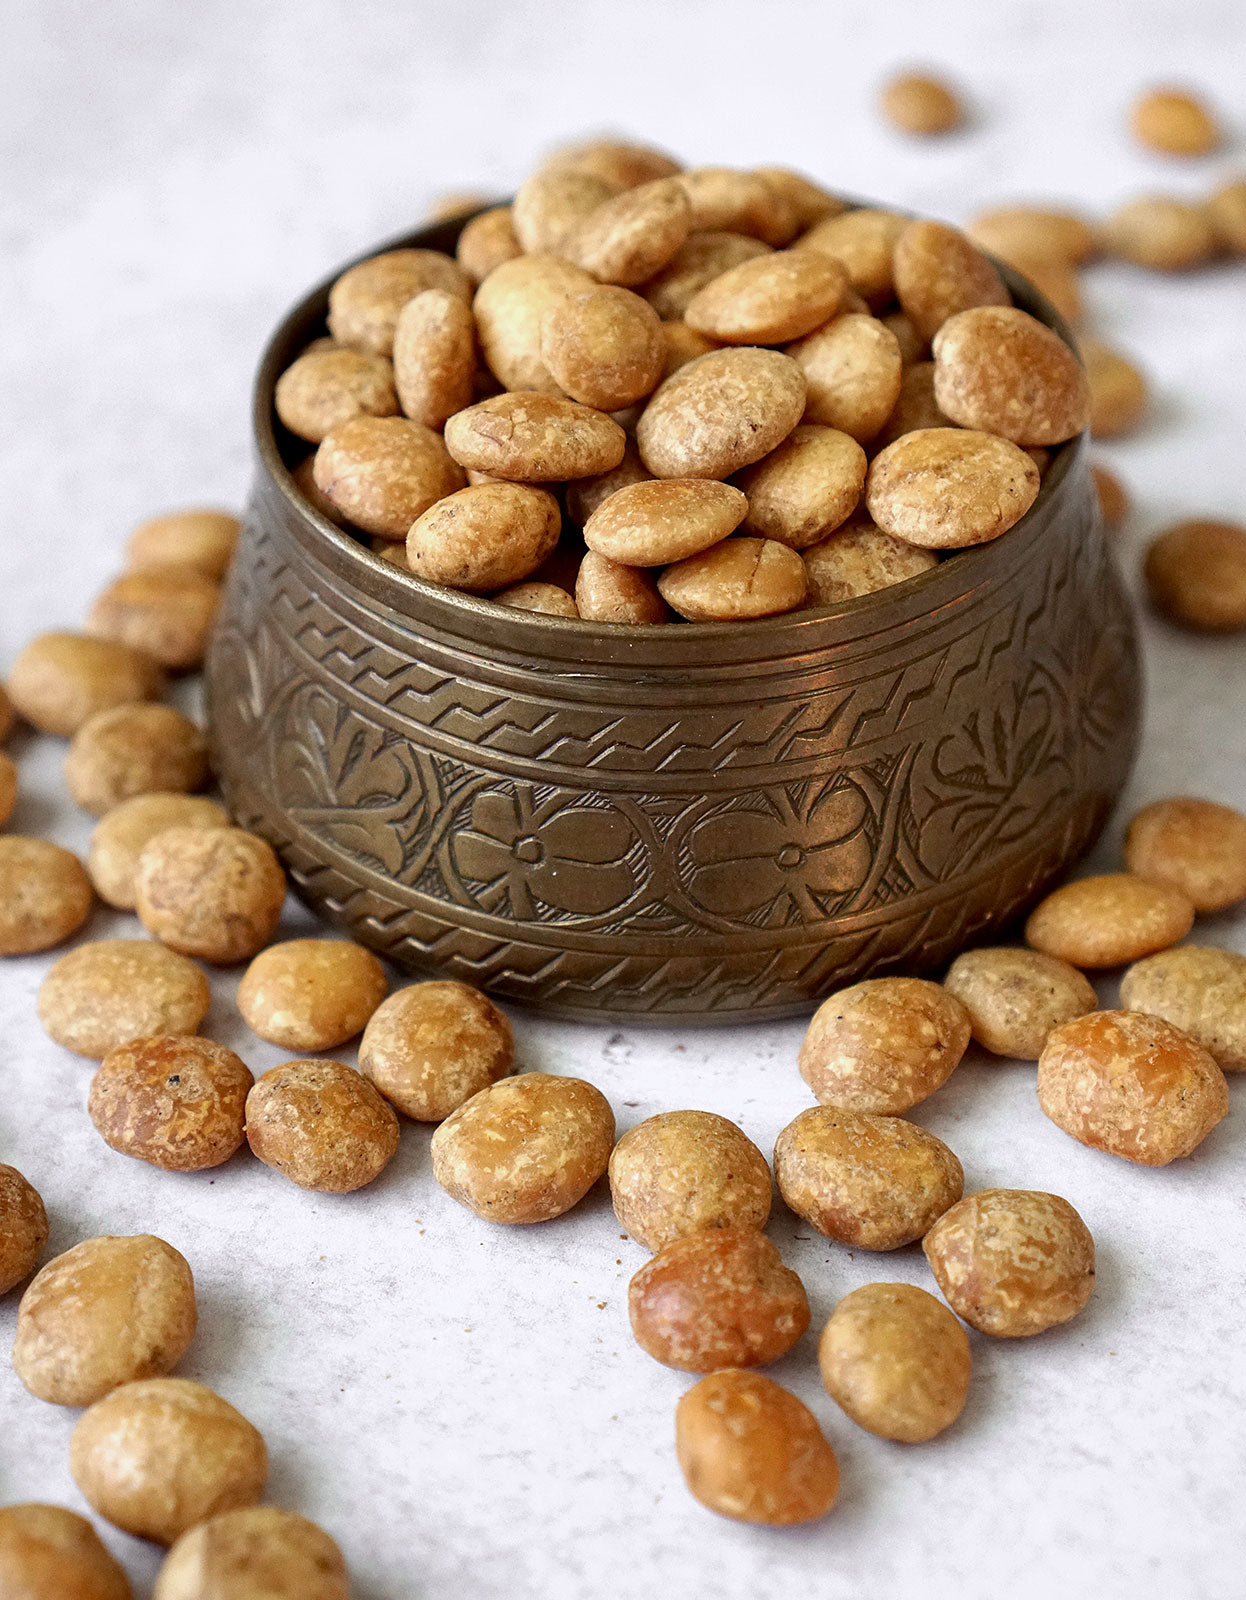 A small brass bowl is filled with sacha inchi seeds from Pure Indian Foods, and a handful of the incan seeds are also scattered around the filled bowl.